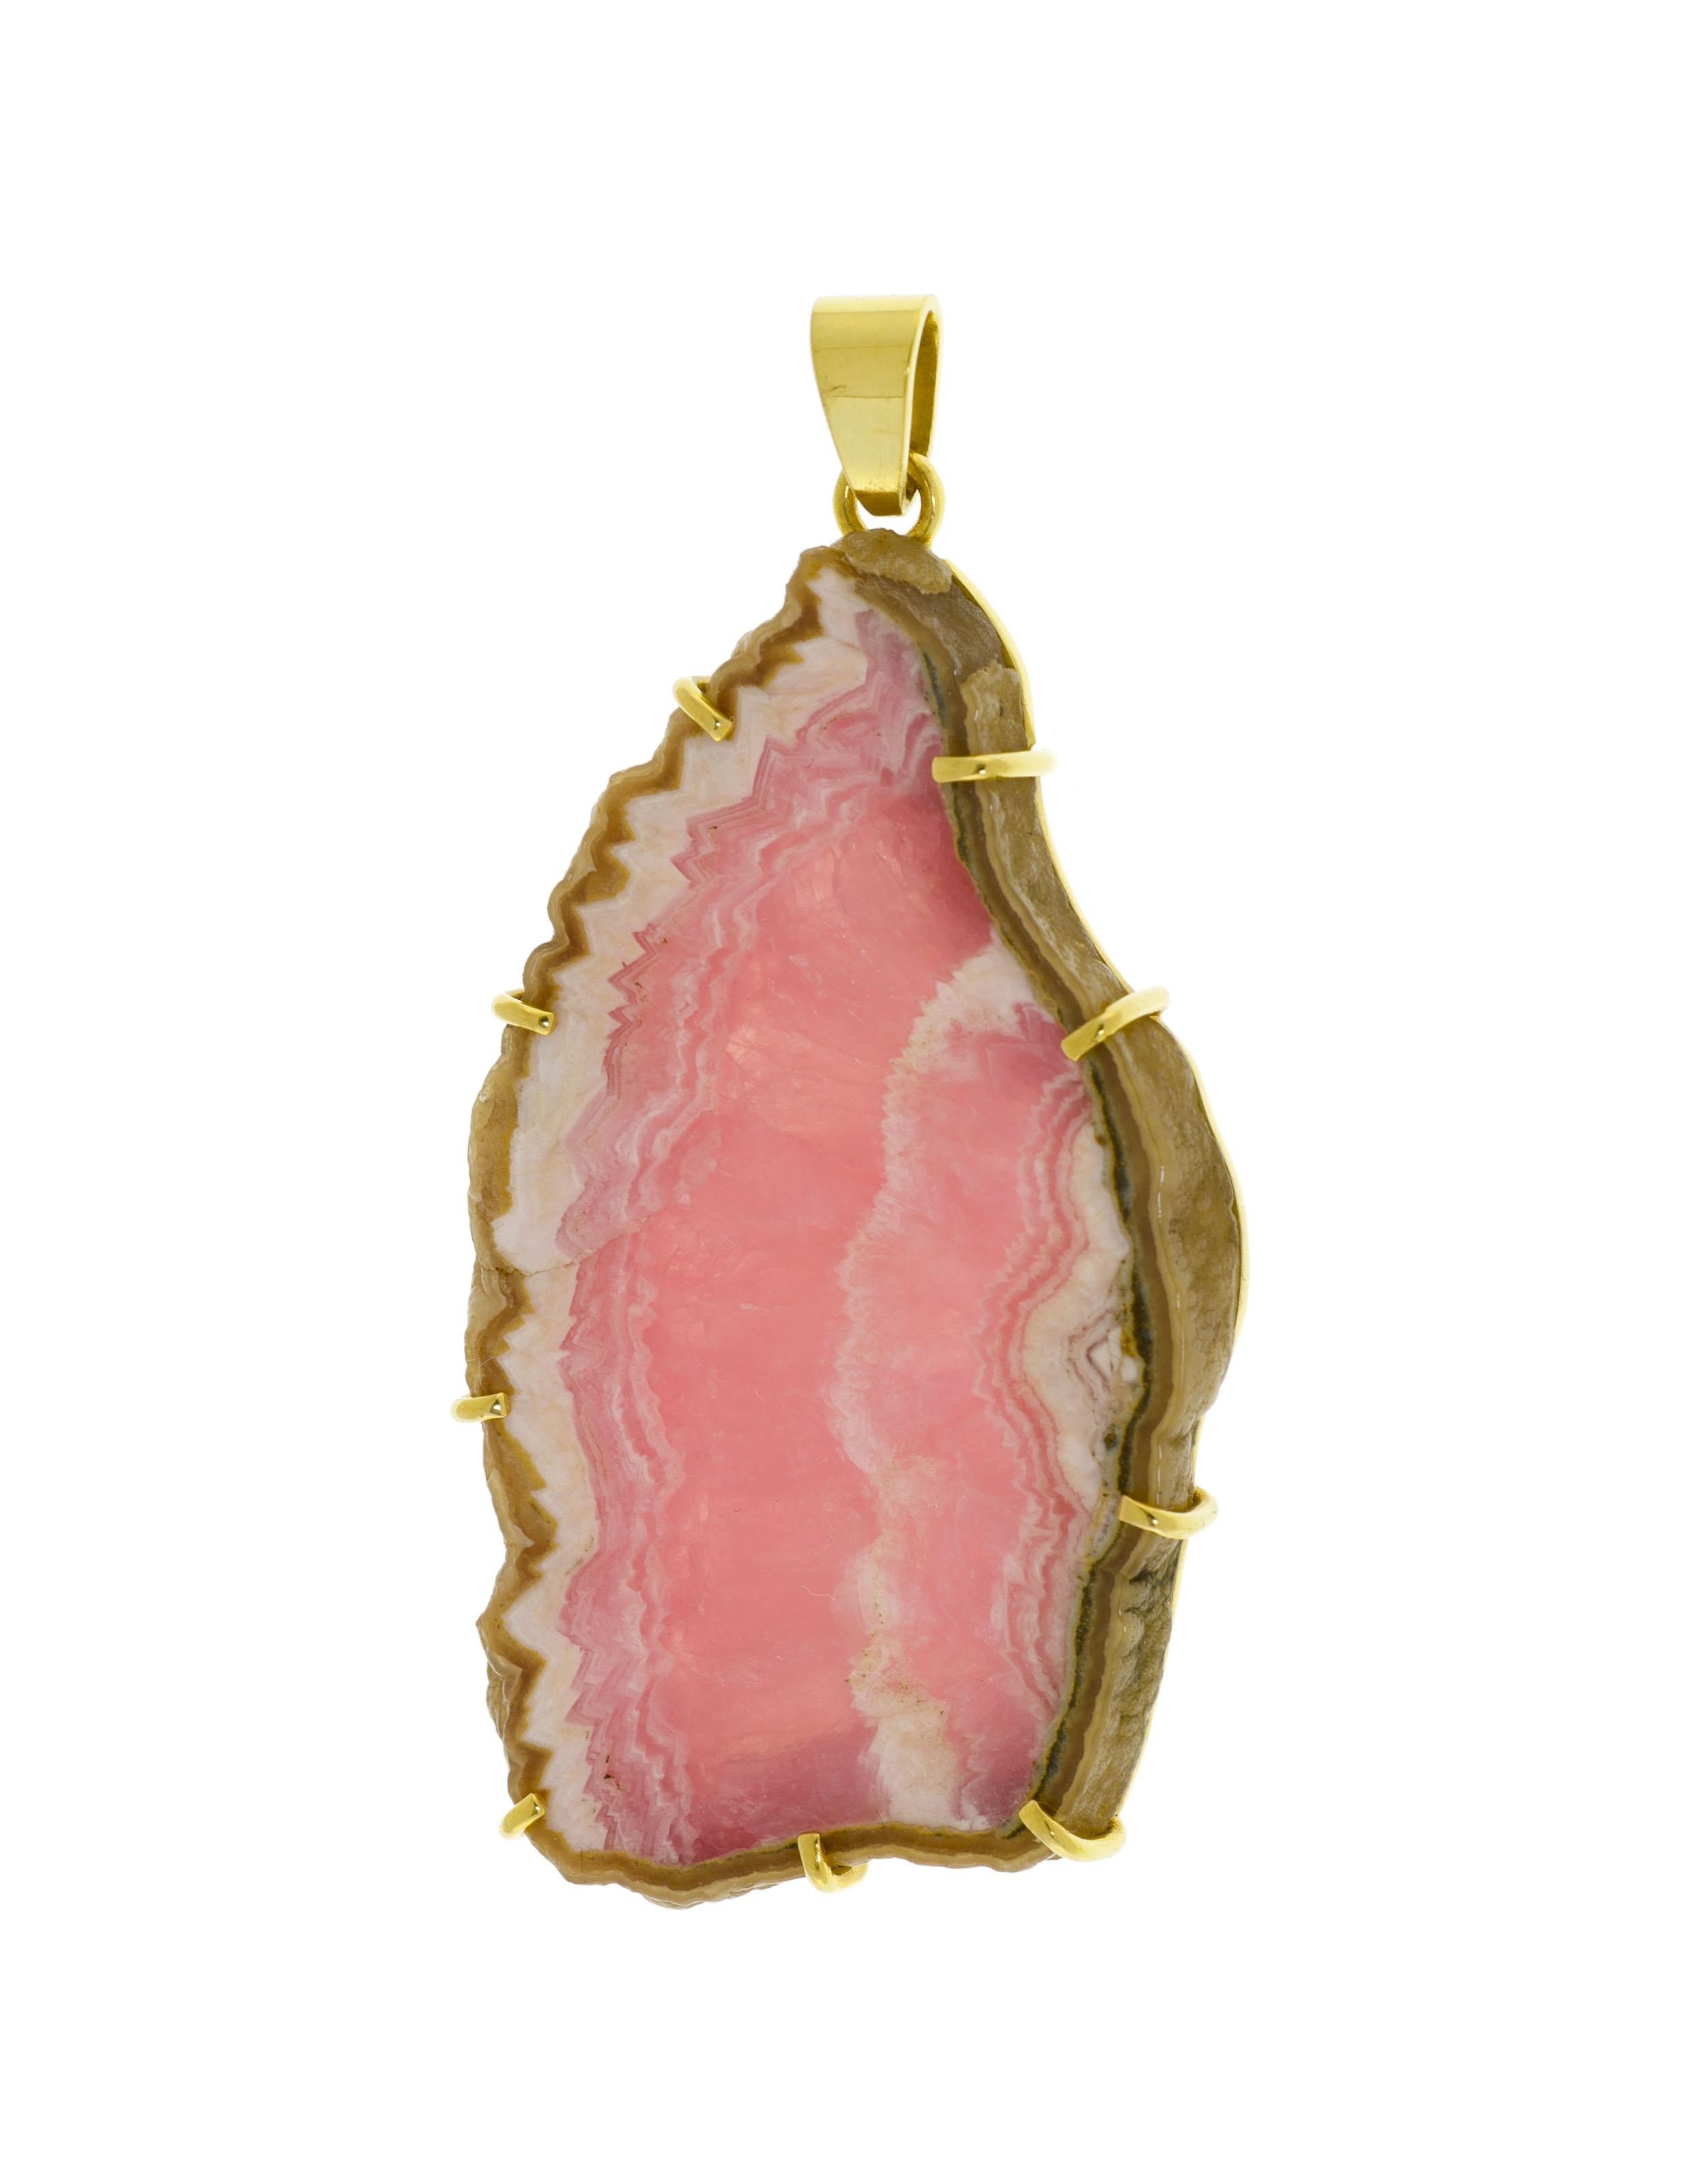 Large pendant featuring a slice of rhodochrosite in a yellow gold setting.

Dimensions : 55.69 x 31.67 x 4.45 mm ( 2.192 x 1.246 x 0.175 inch)

Total weight of the ring : 24g

18 karat yellow gold, 750/1000

Although we take care of the quality of